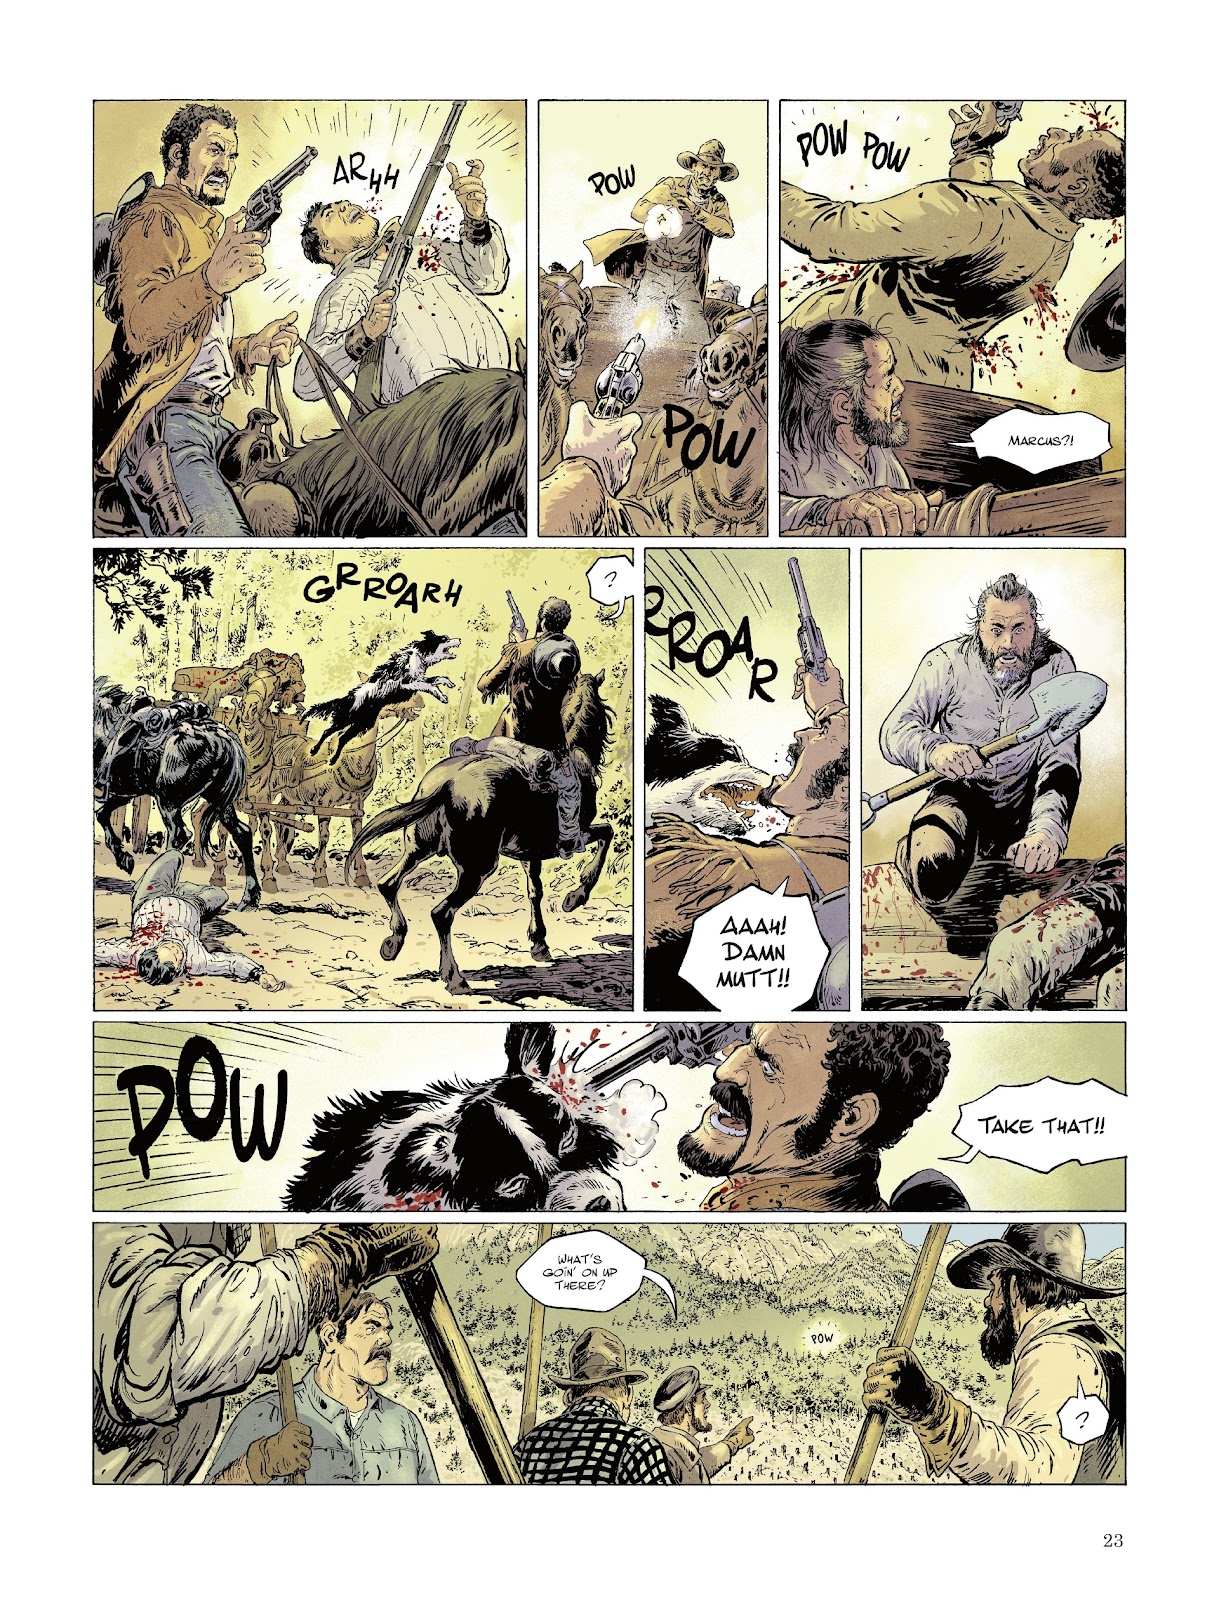 The Tiger Awakens: The Return of John Chinaman issue 1 - Page 24